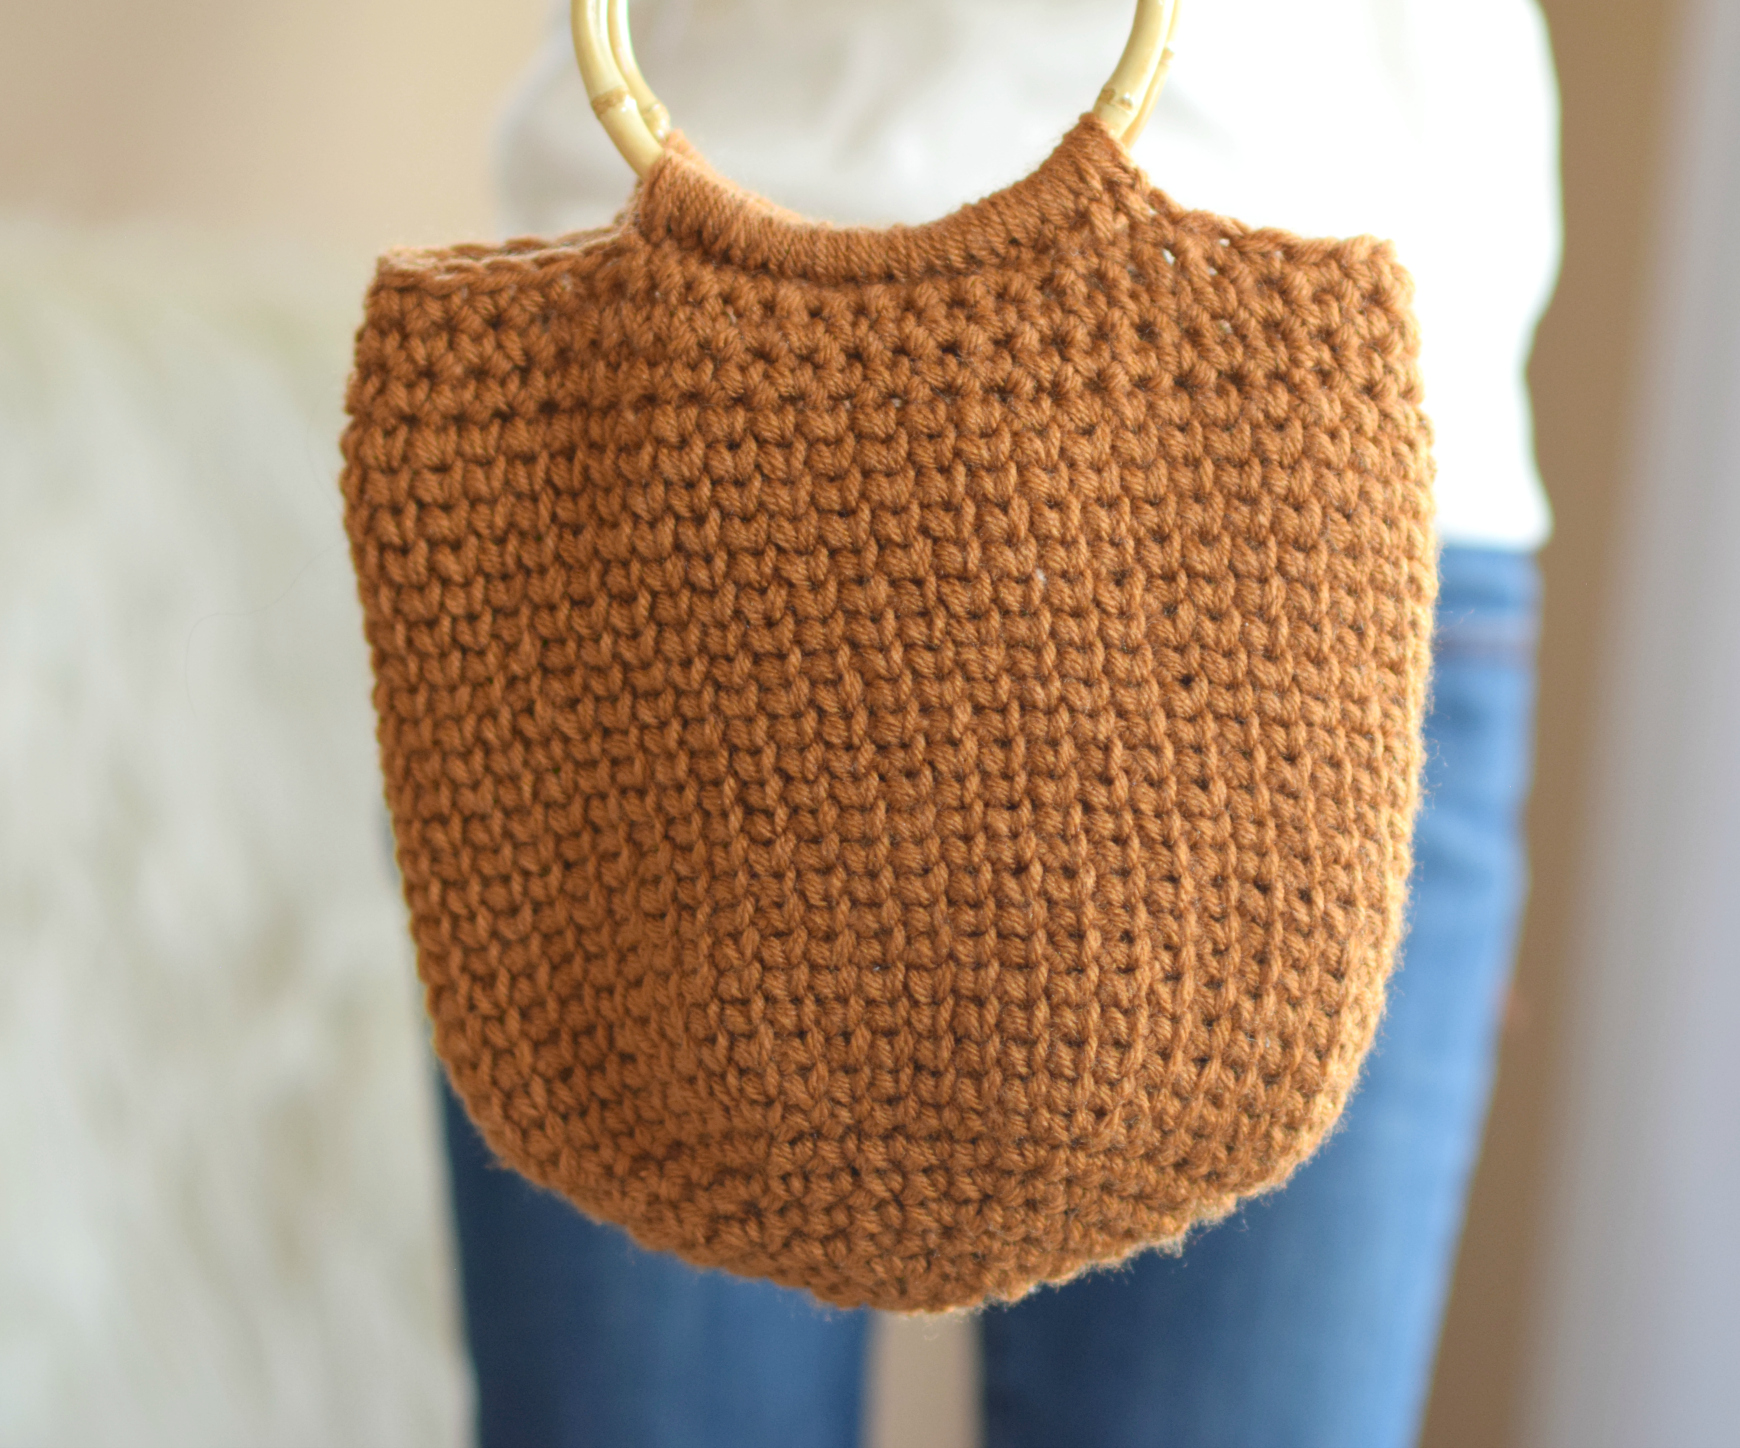 Ravelry: oldie's Crochet Purse with Round Handles